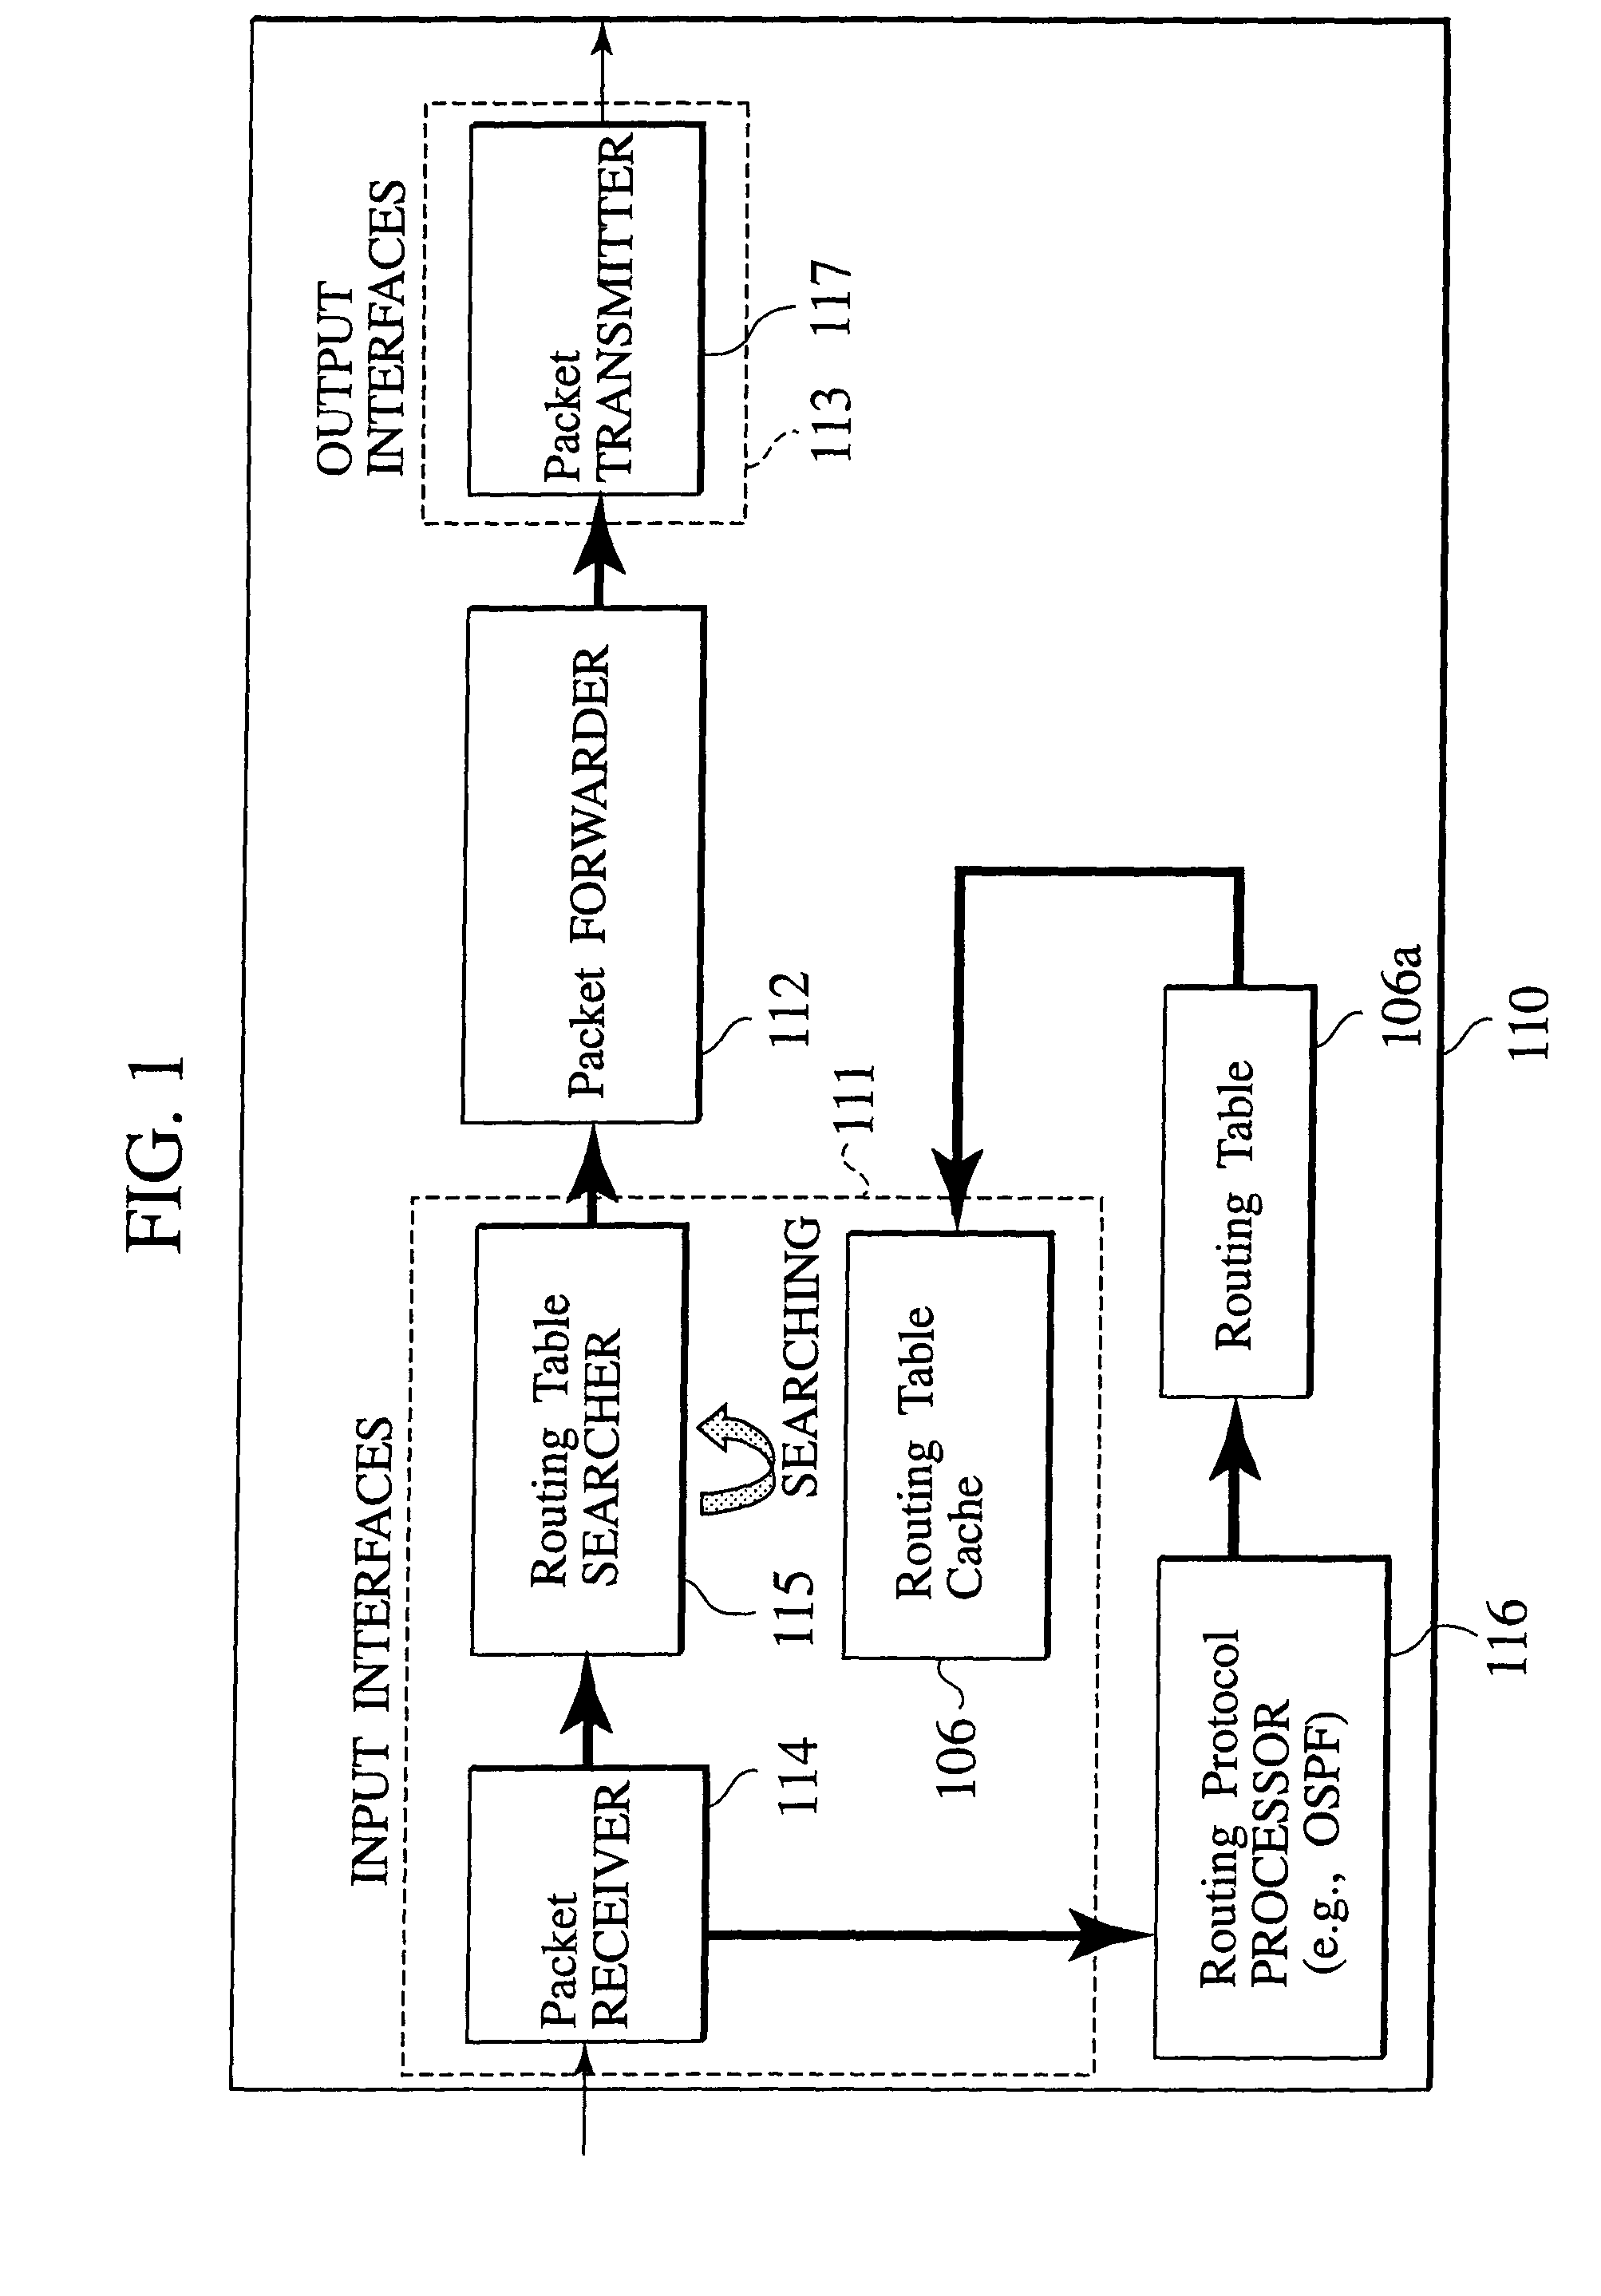 Packet switching system, packet switching method, routing apparatus, structure of packet, and packet generating method